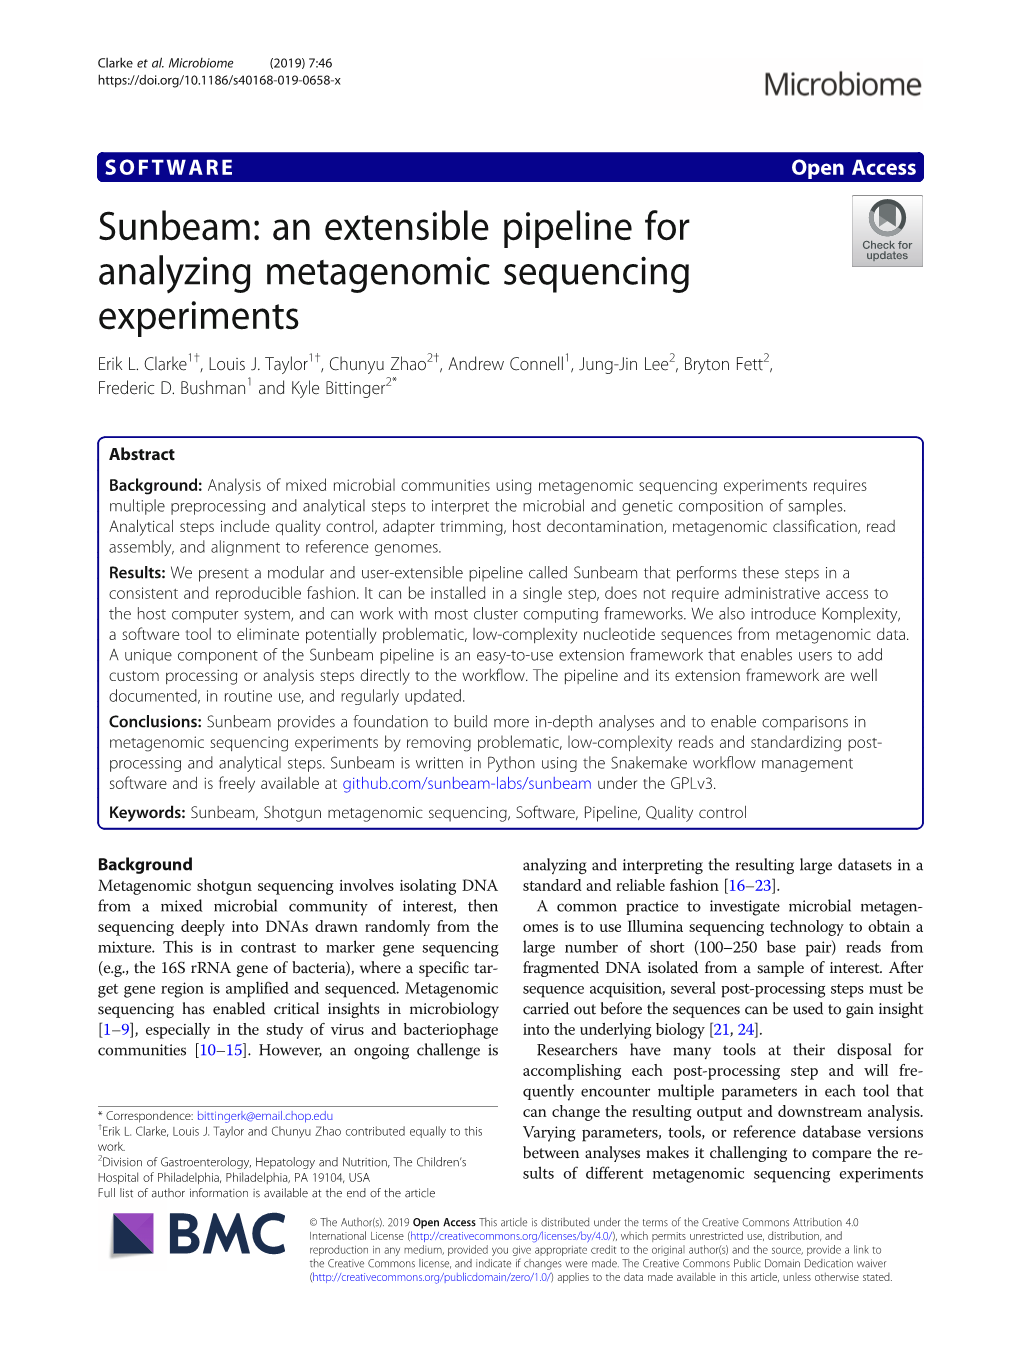 Sunbeam: an Extensible Pipeline for Analyzing Metagenomic Sequencing Experiments Erik L